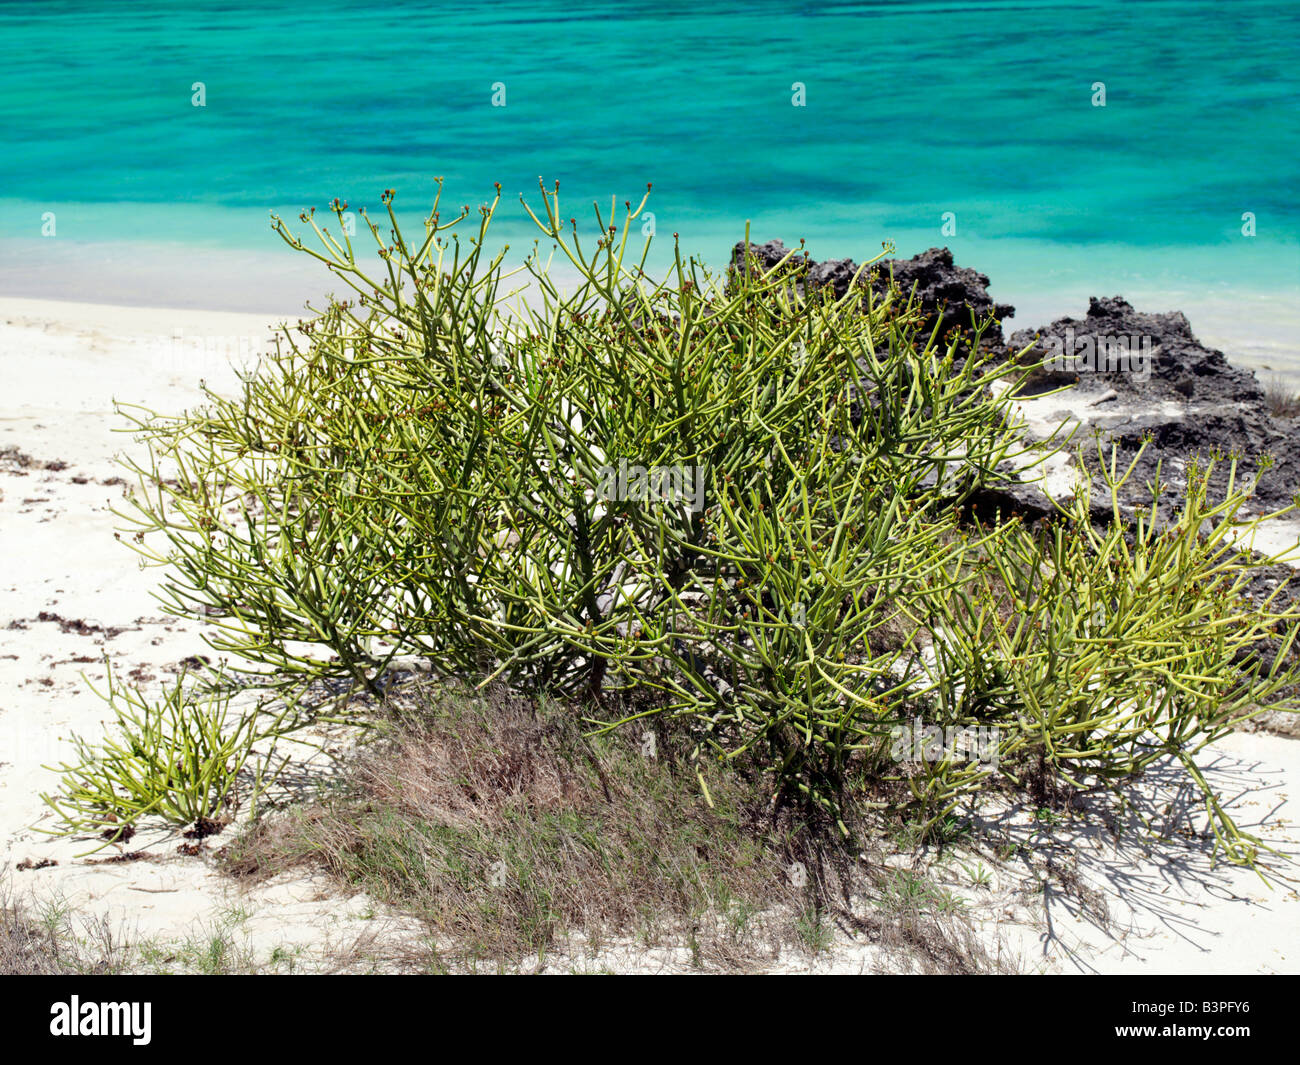 Northern Madagascar, A euphorbia plant grows on the beach at Suarez Island, a small island situated off the northern coast of Madagascar. A combination of safe bathing in the beautiful, crystal-clear waters of Mer d'Emeraude (Emerald Sea), a fine sandy beach and its proximity to Antsiranana (Diego Suarez) make the island a favourite destination for the residents of Diego. Stock Photo